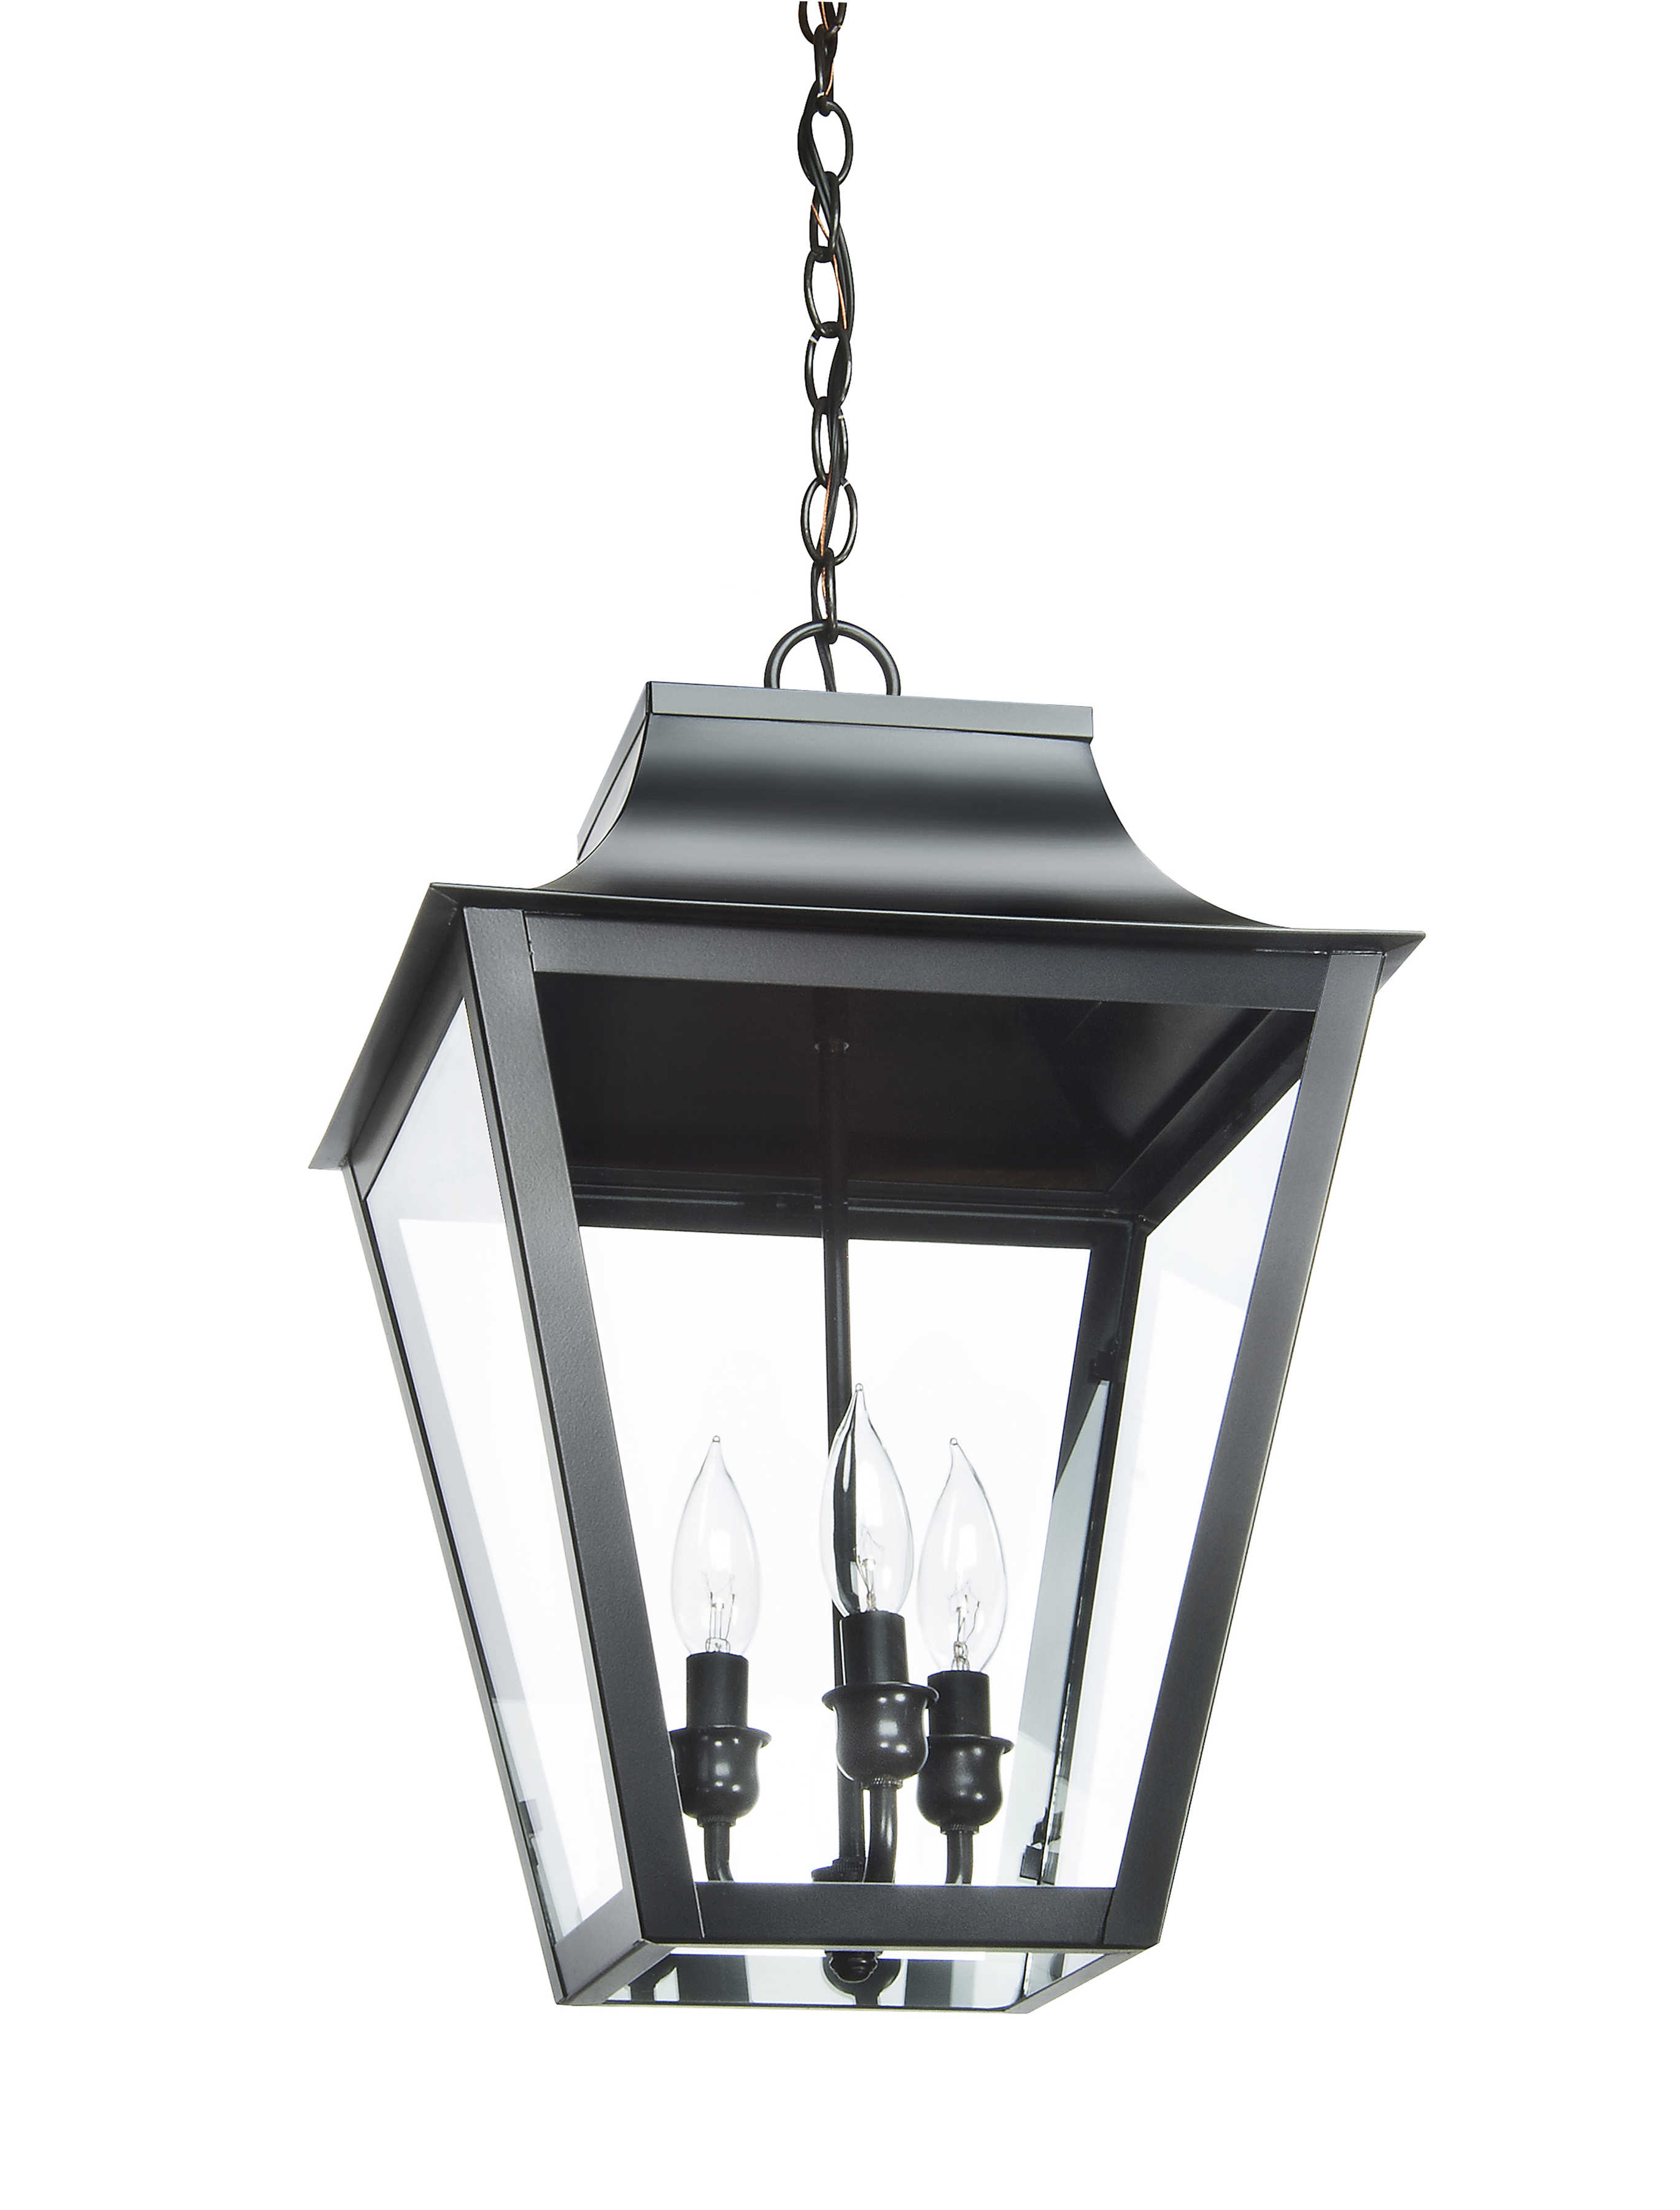 NC 21- hanging light, copper lanterns, gas and electric lighting